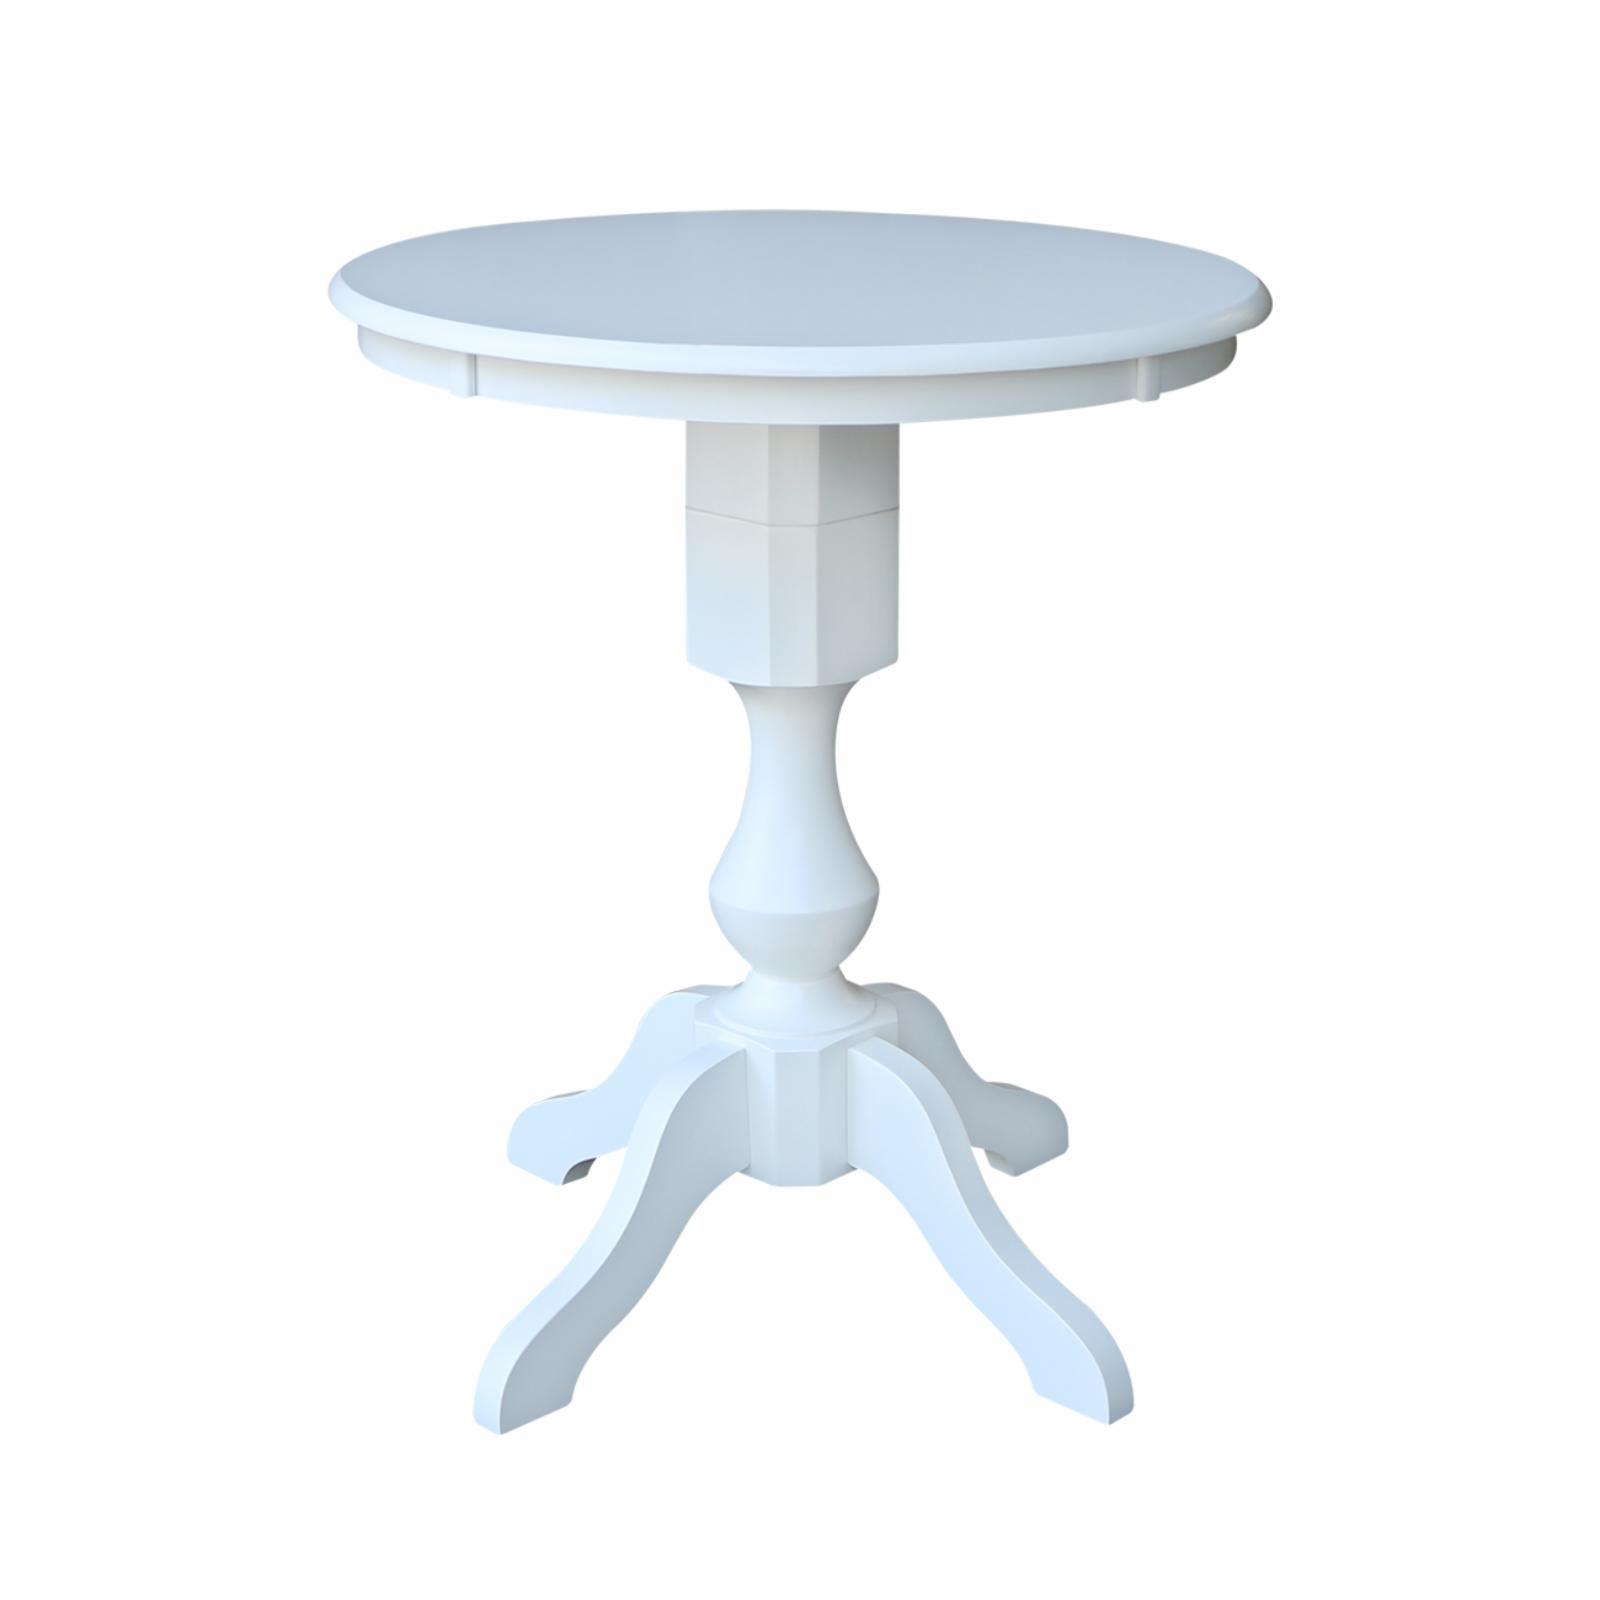 Elegant Sophia White Round Solid Wood French Country Dining Table